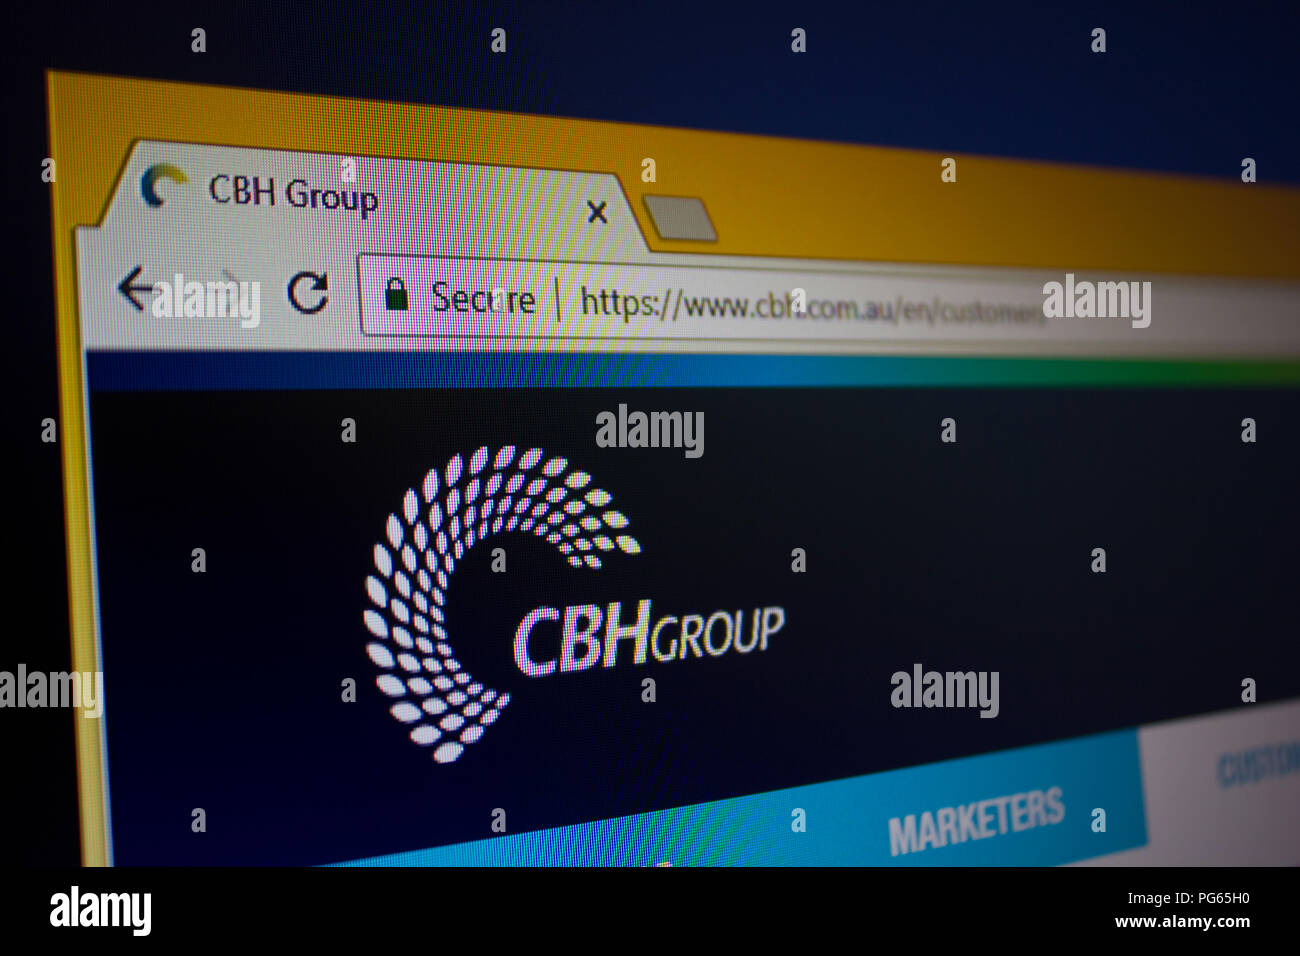 CBH Group Website homepage Stock Photo